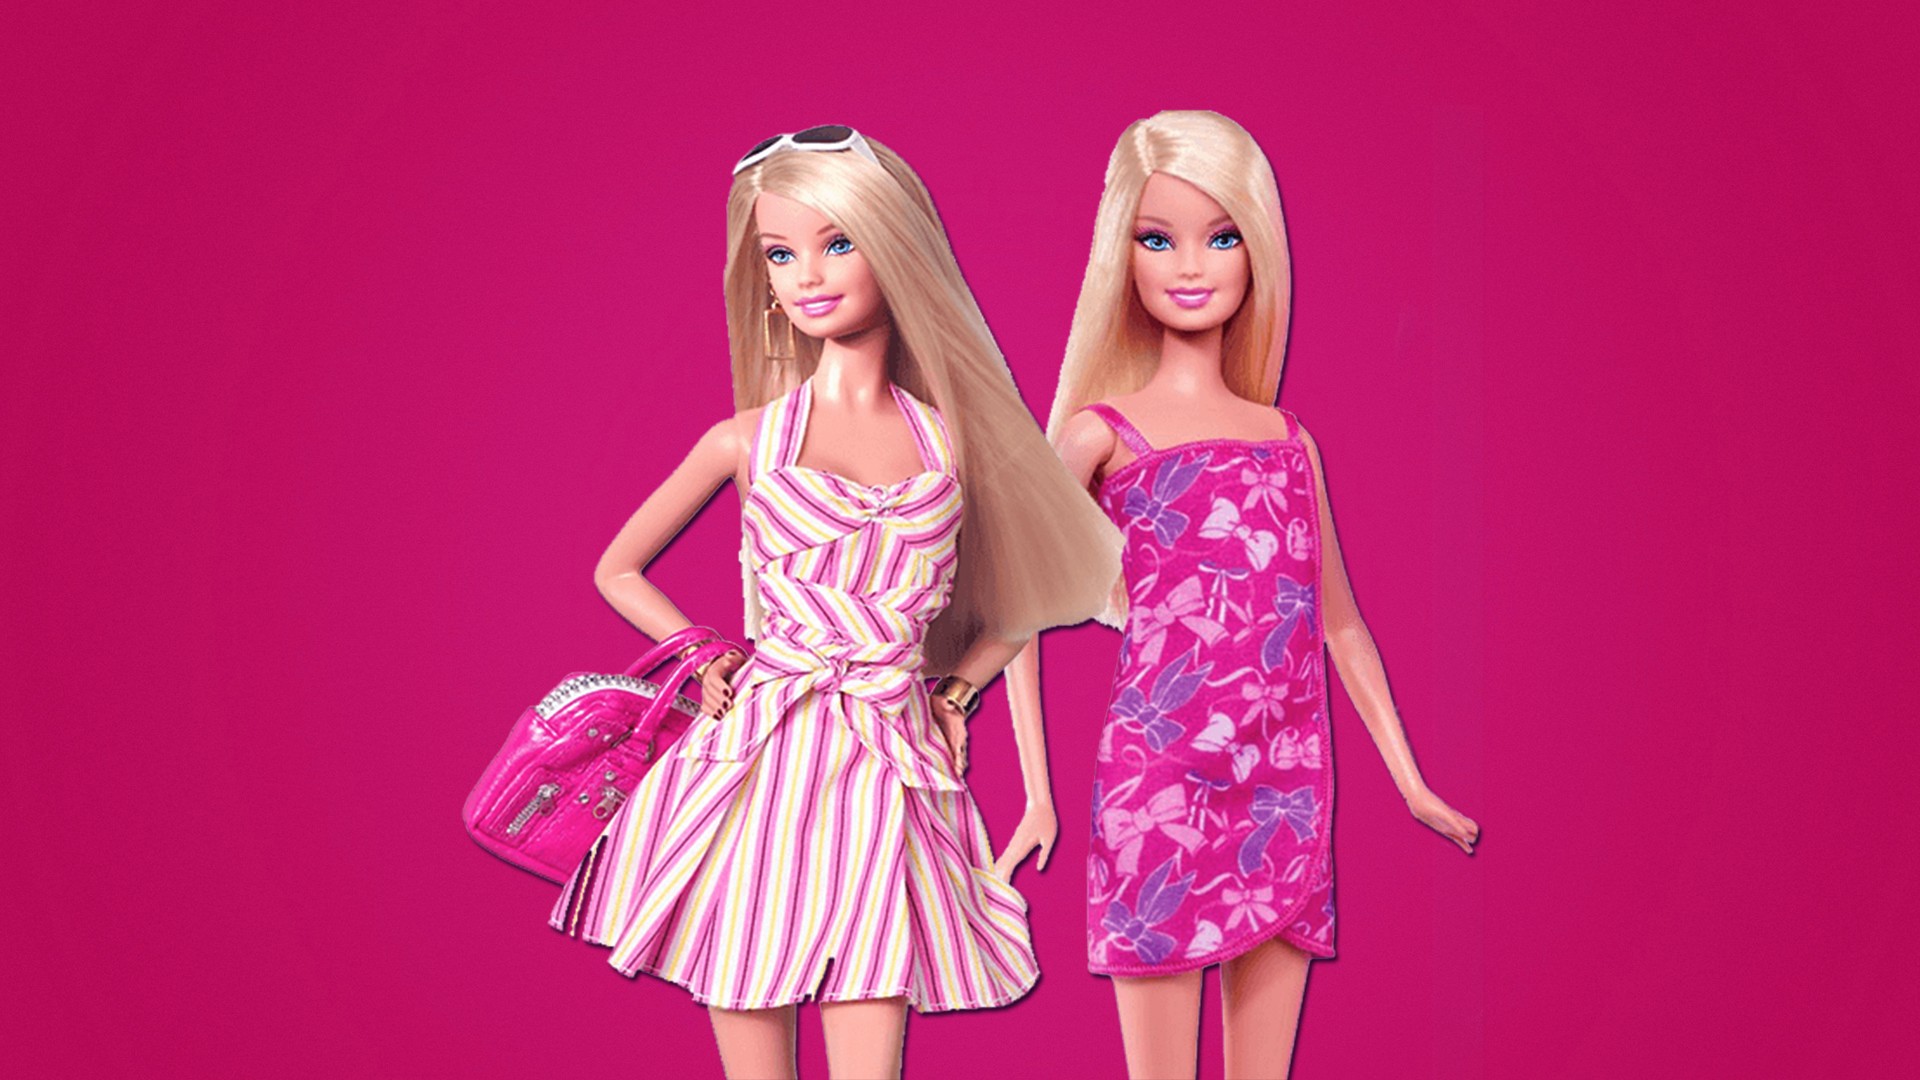 barbie wallpaper,doll,barbie,pink,toy,clothing